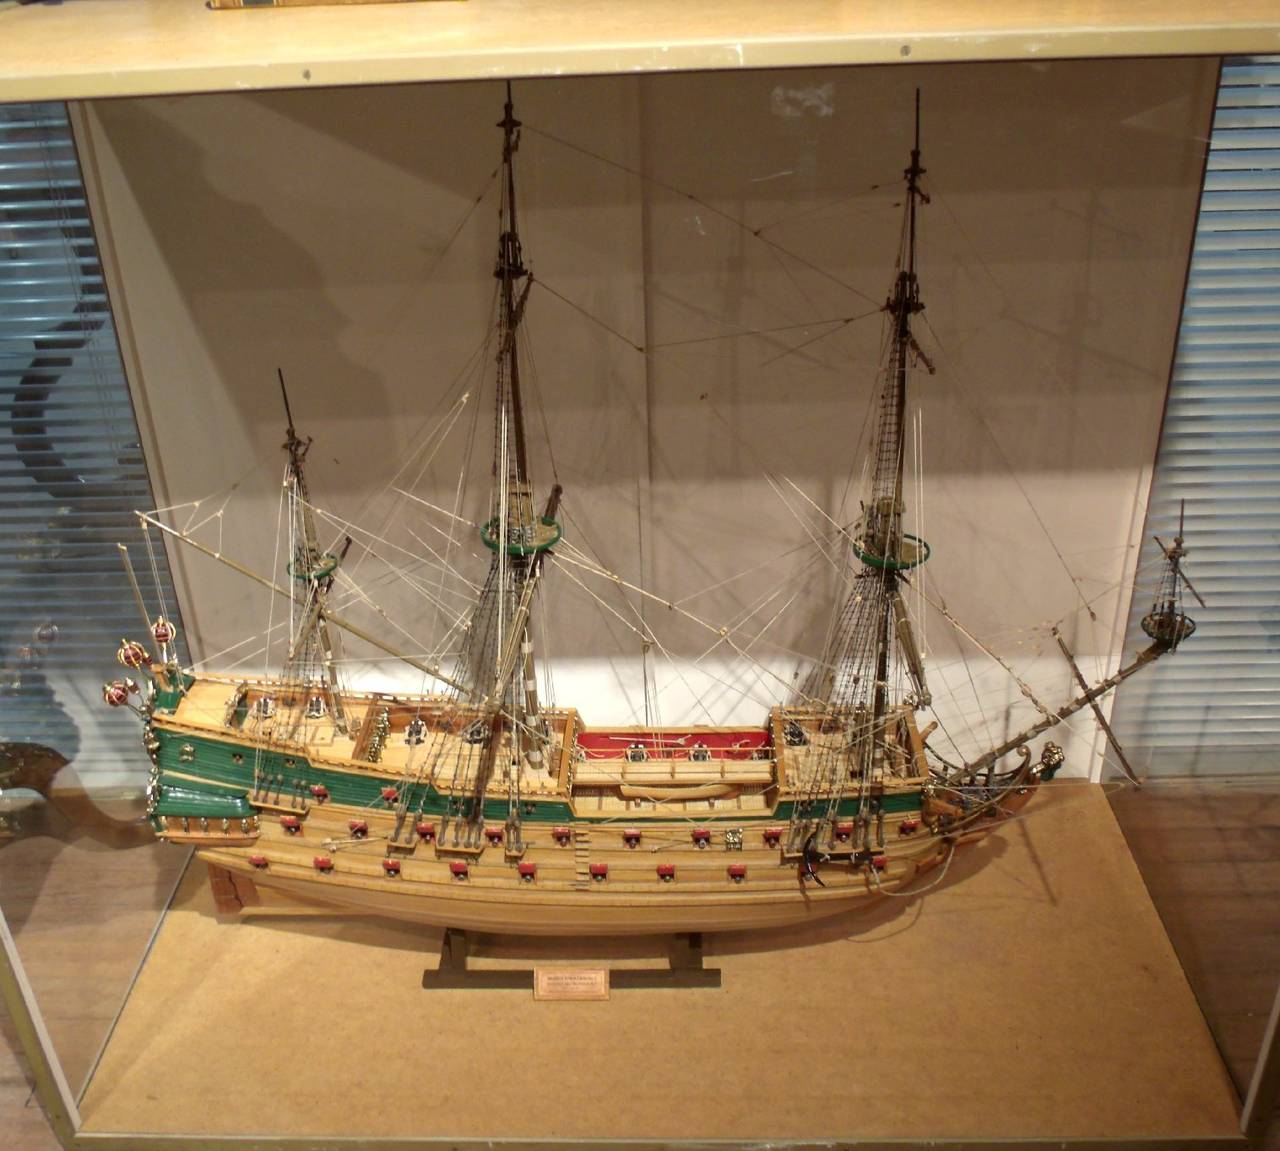 Wappen Von Hamburg, a 17th century German fighting ship, was commissioned by Admiral Karpfanger, and she was then employed, very successfully as a heavily armed Convoy Escort Ship. She engaged and sank a large number of pirate ships during her short